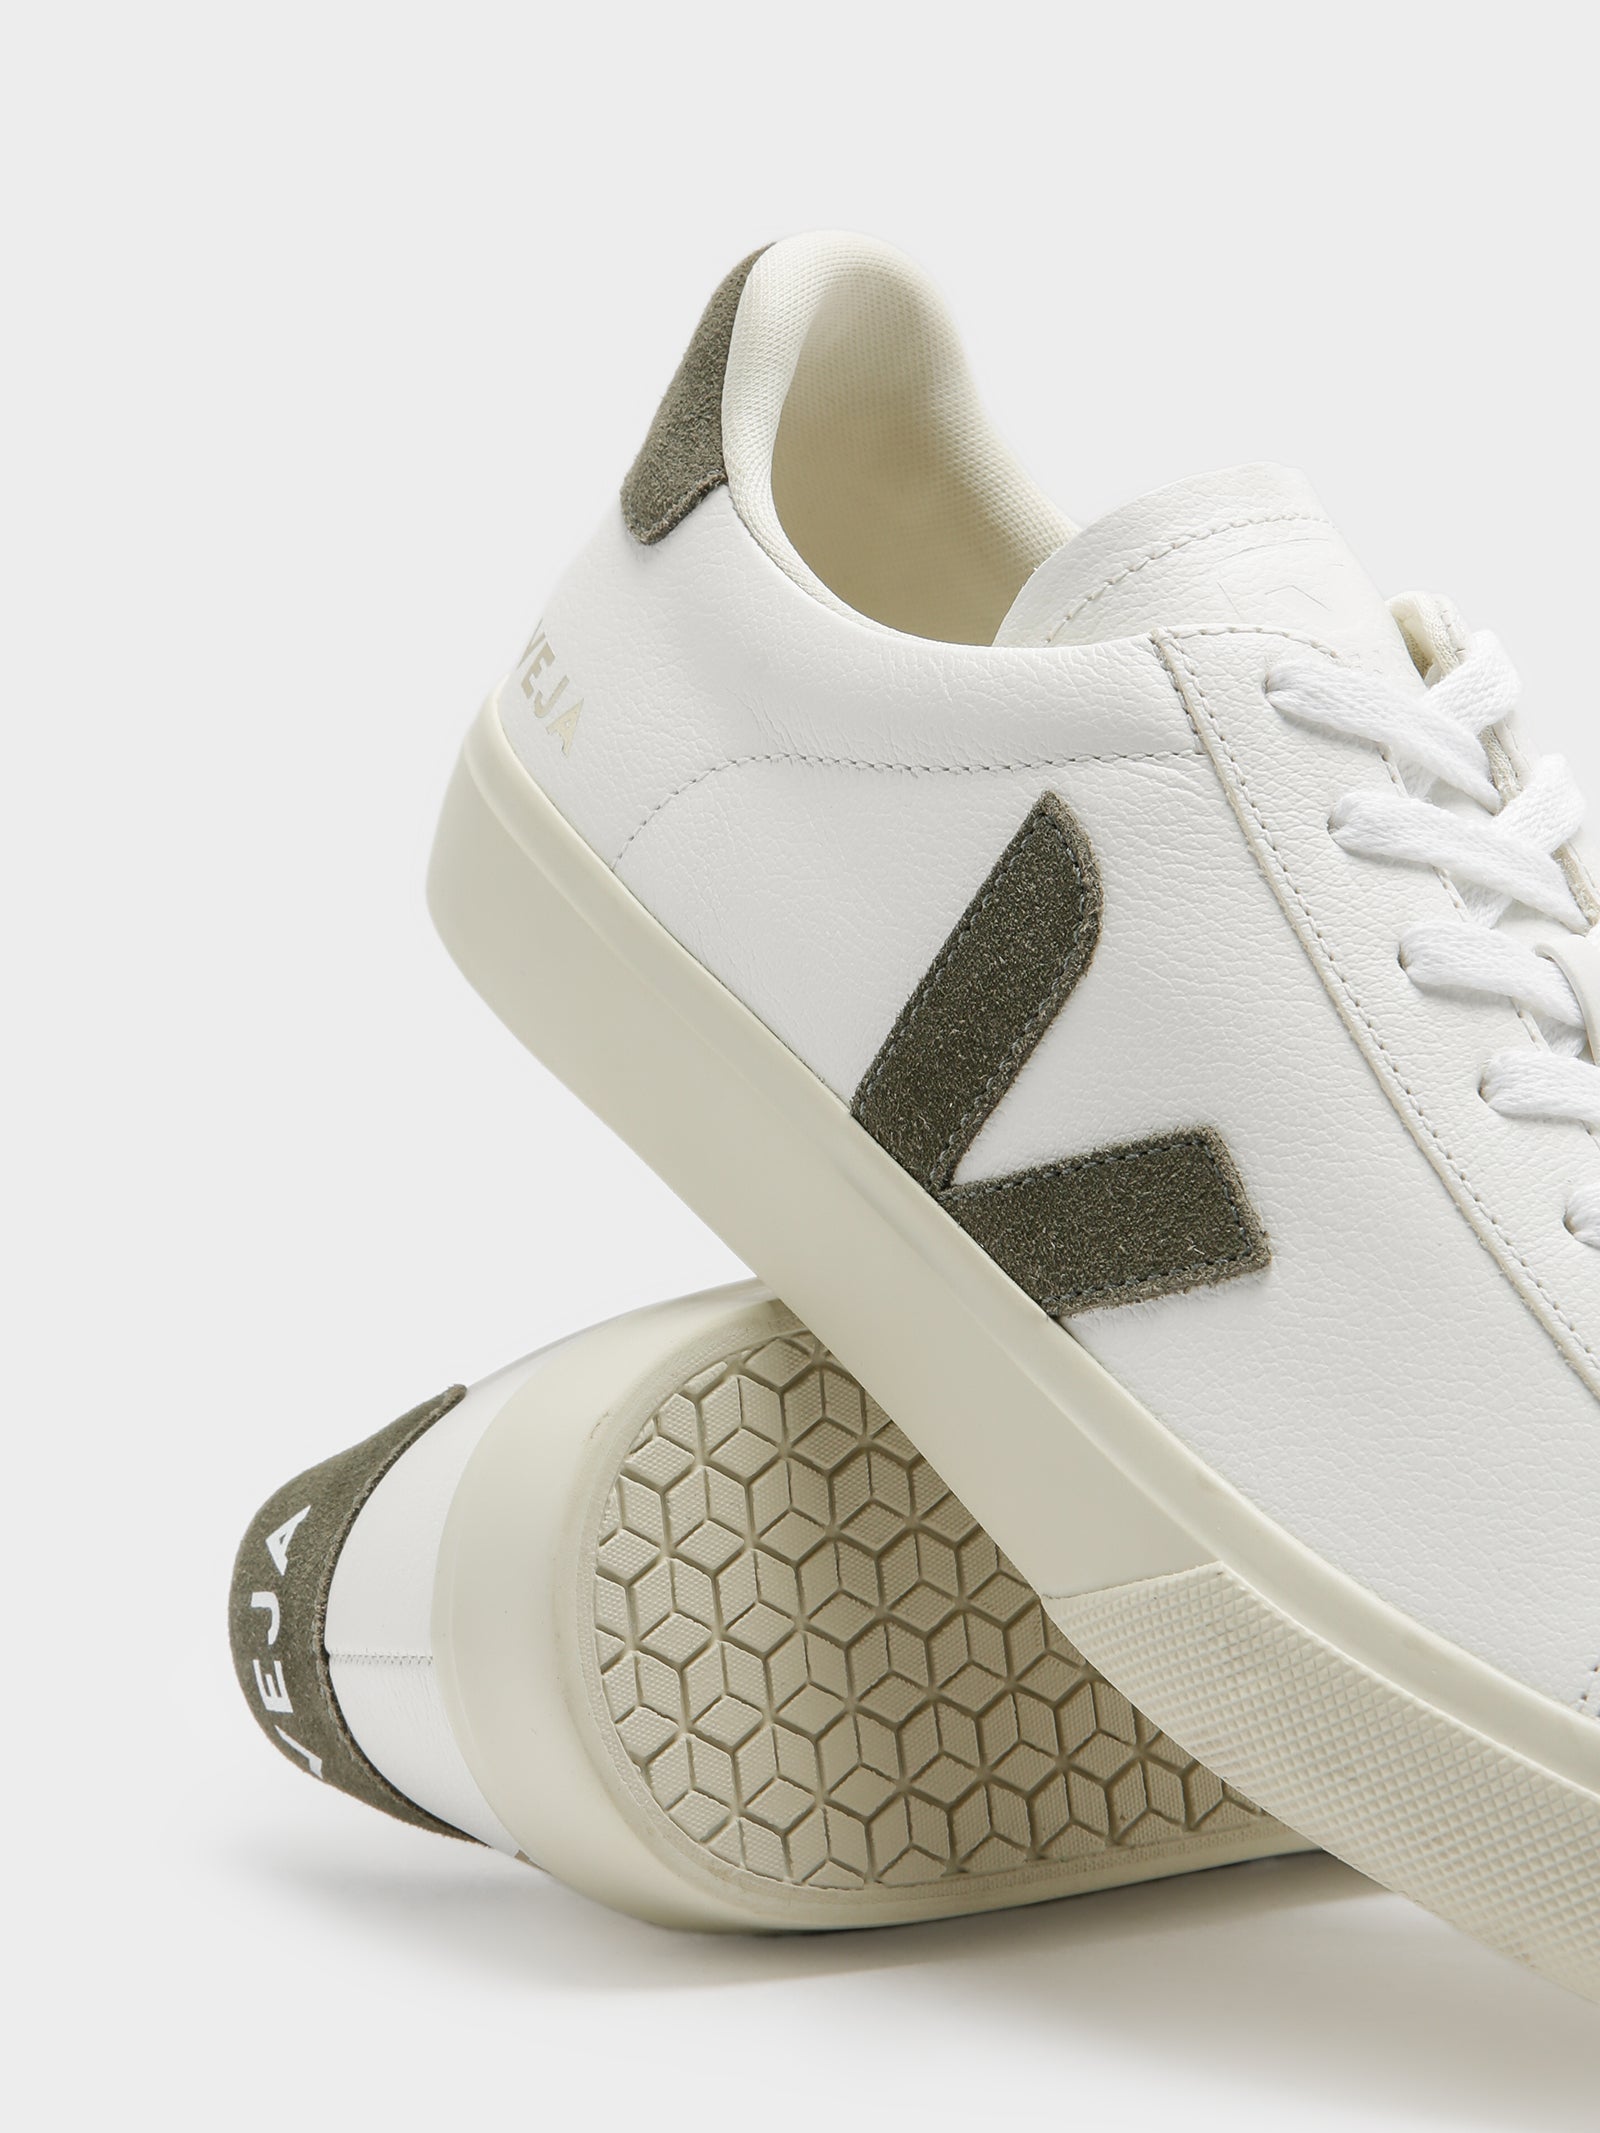 Mens Campo Leather Sneakers in White & Khaki